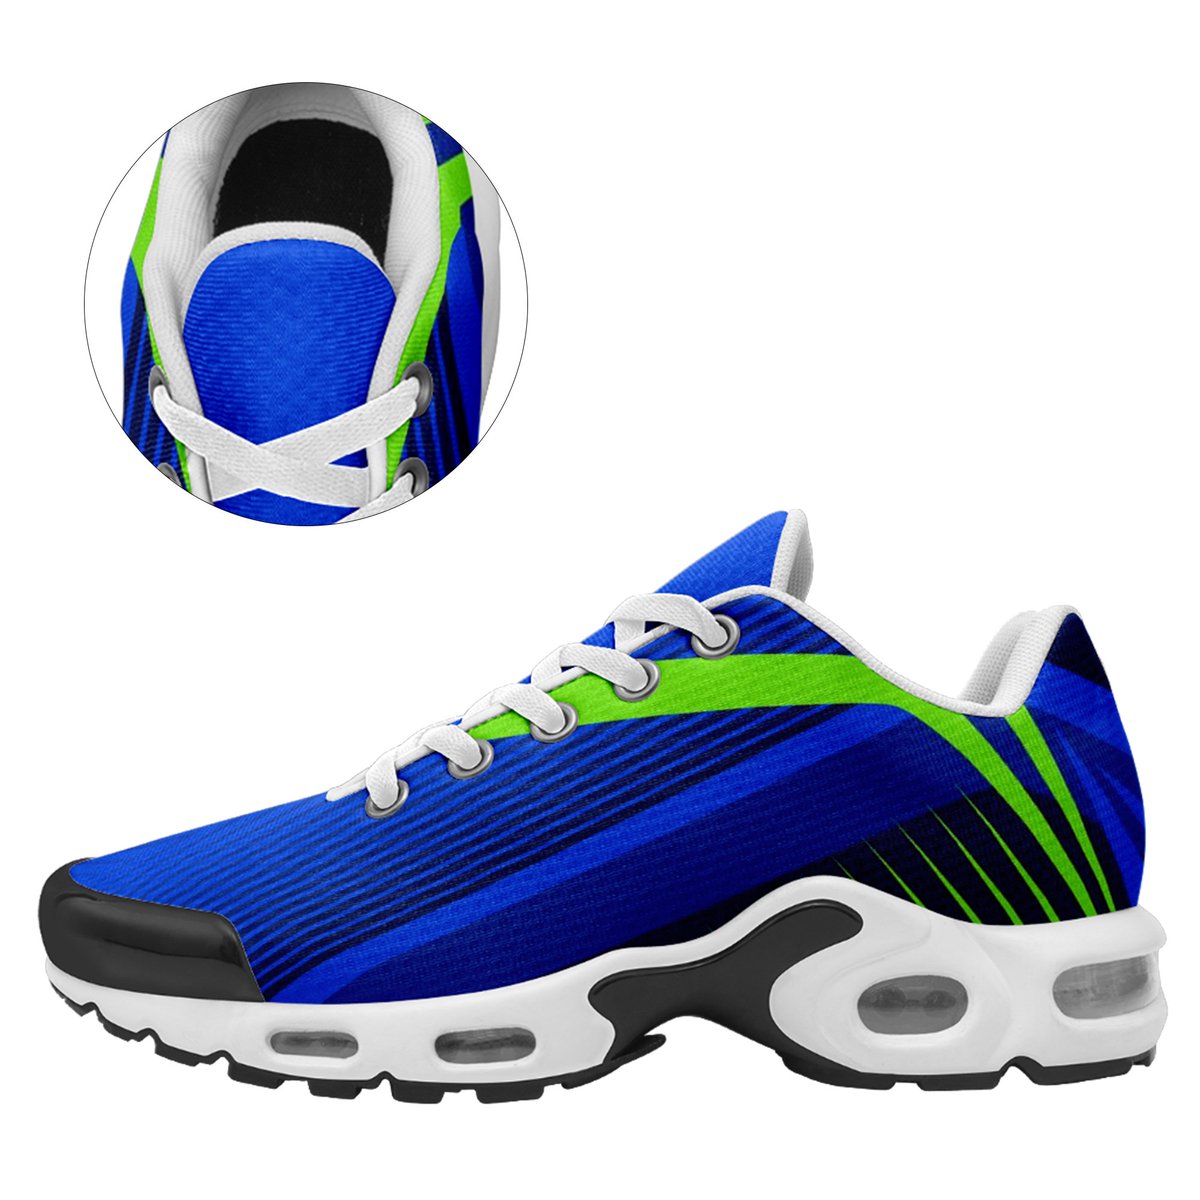 Step into Personalized Performance with Custom TN Sportshoes
#coolcustomize #printondemand #customshoe #SneakerAddiction #YourStyleYourWay #TNFashion